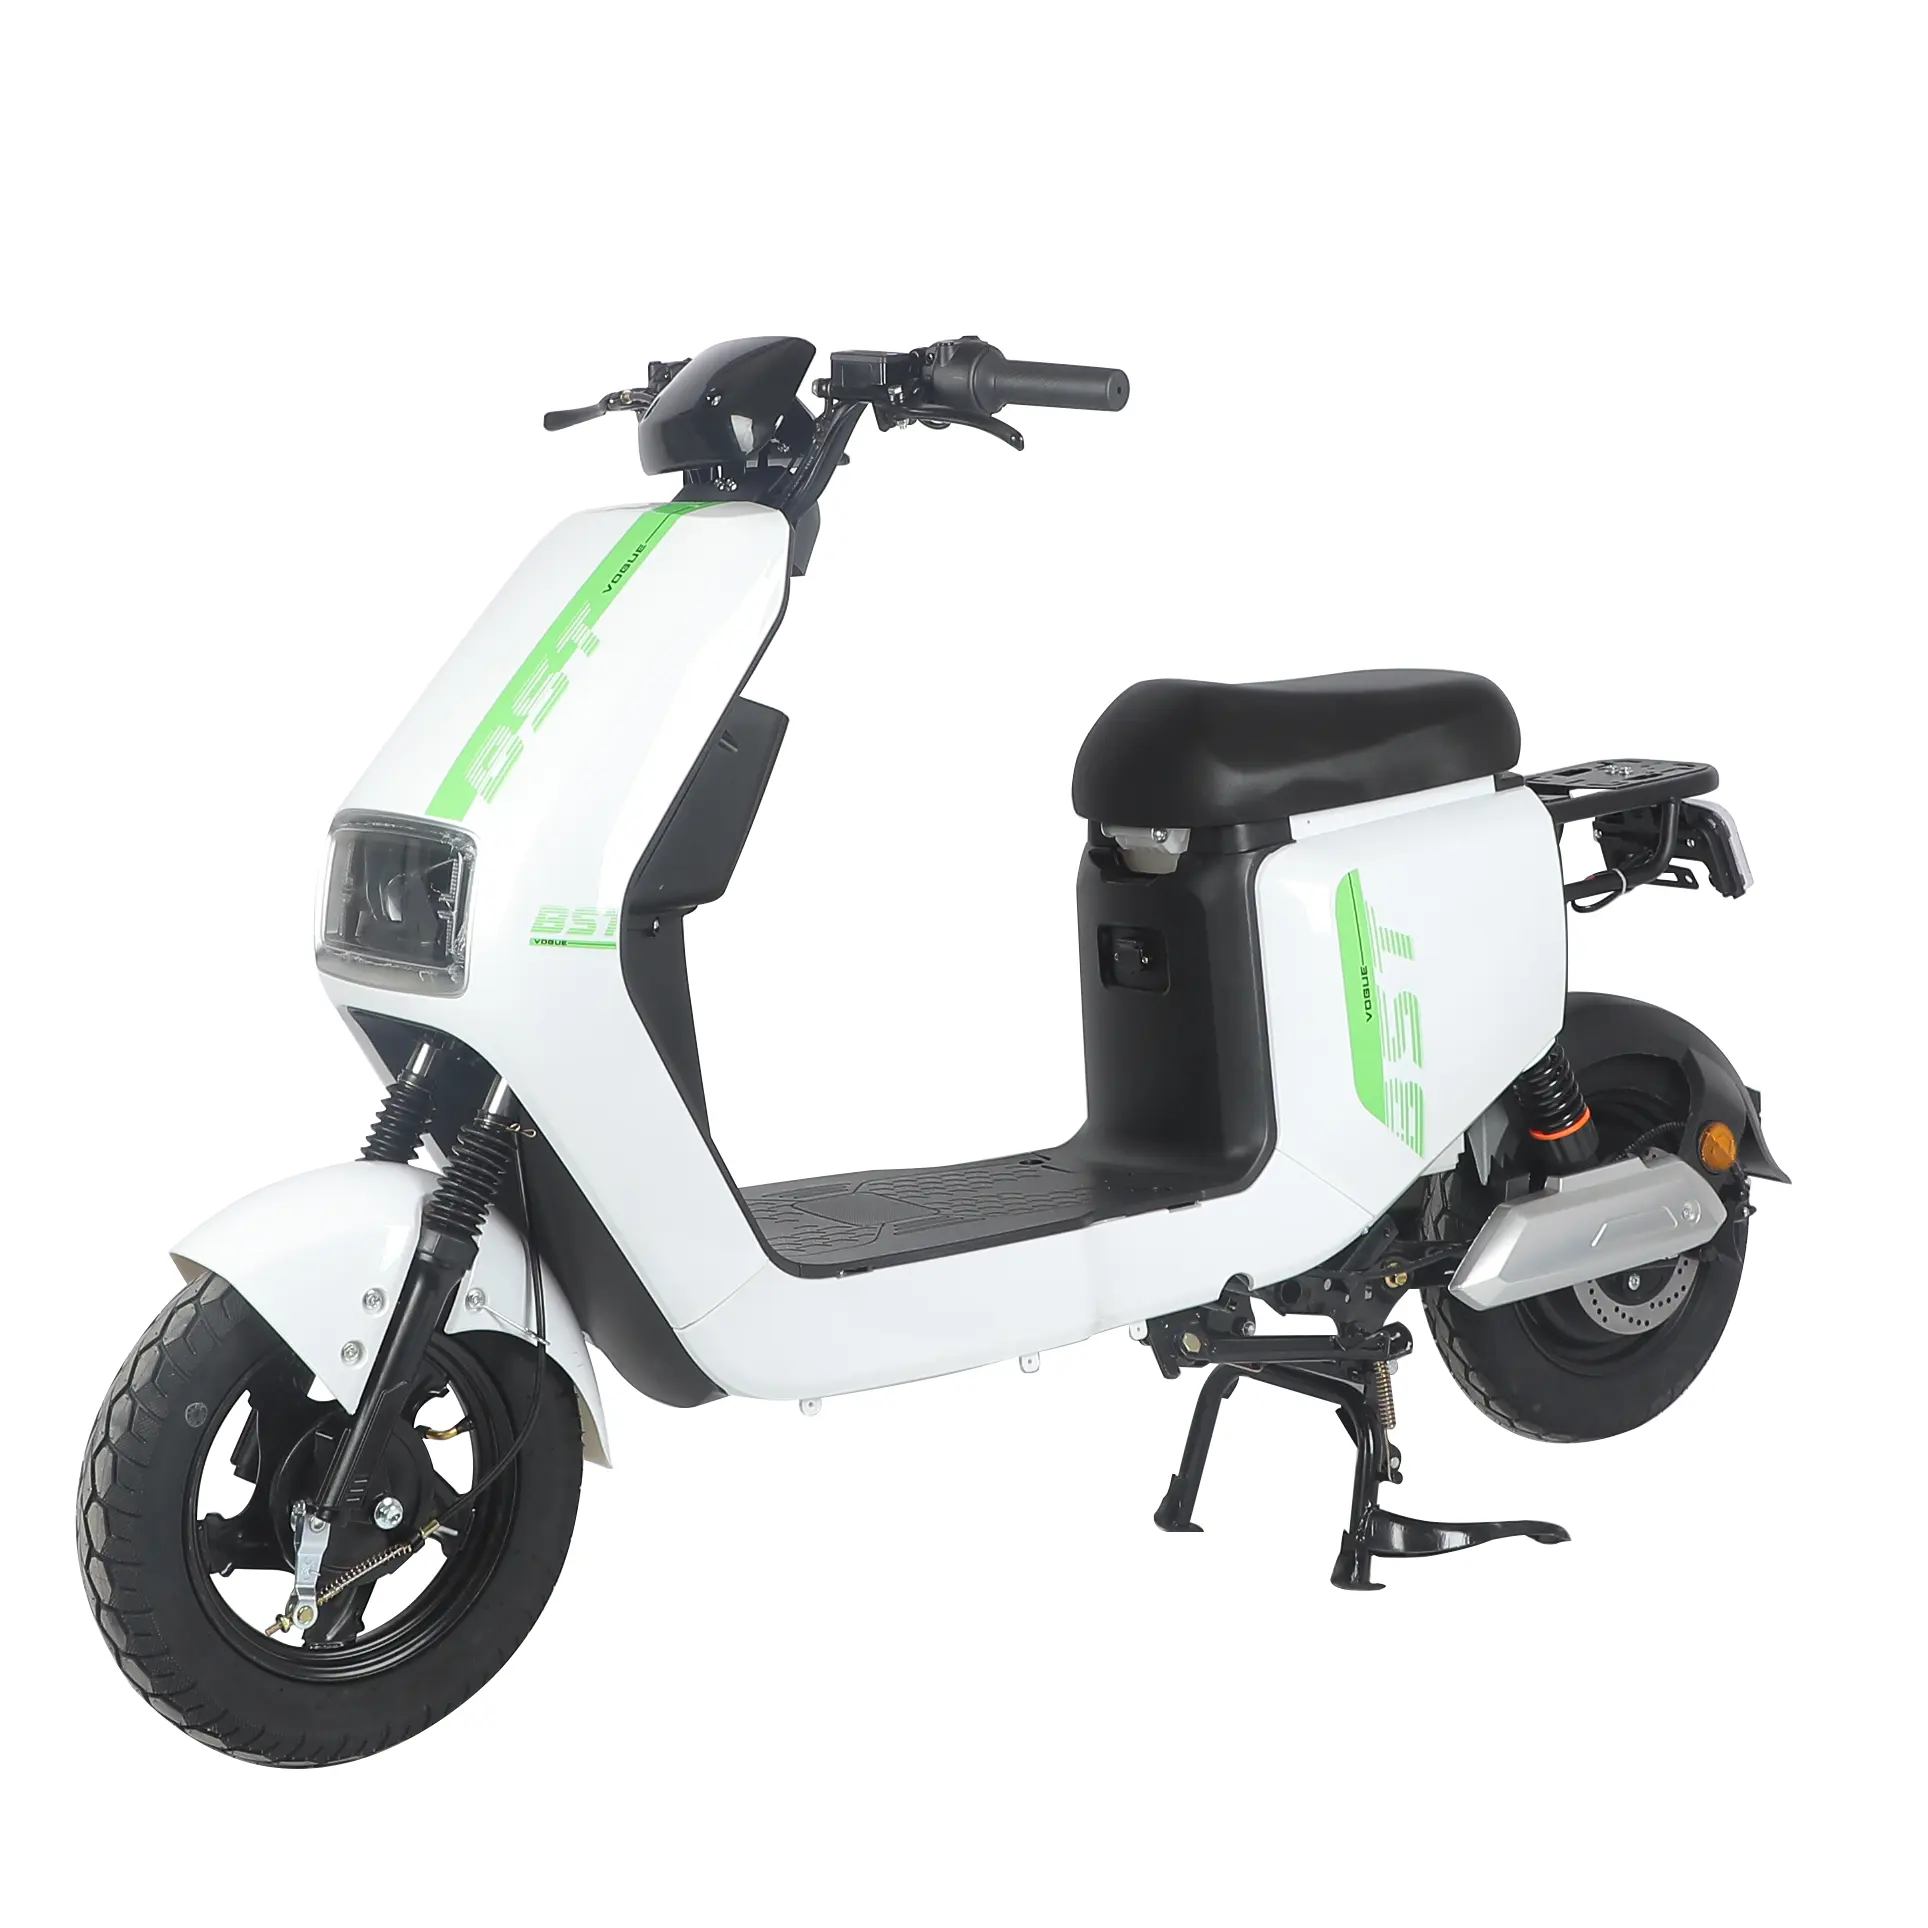 China factory sale High Quality Electric Two-Wheel Motorcycle in stock